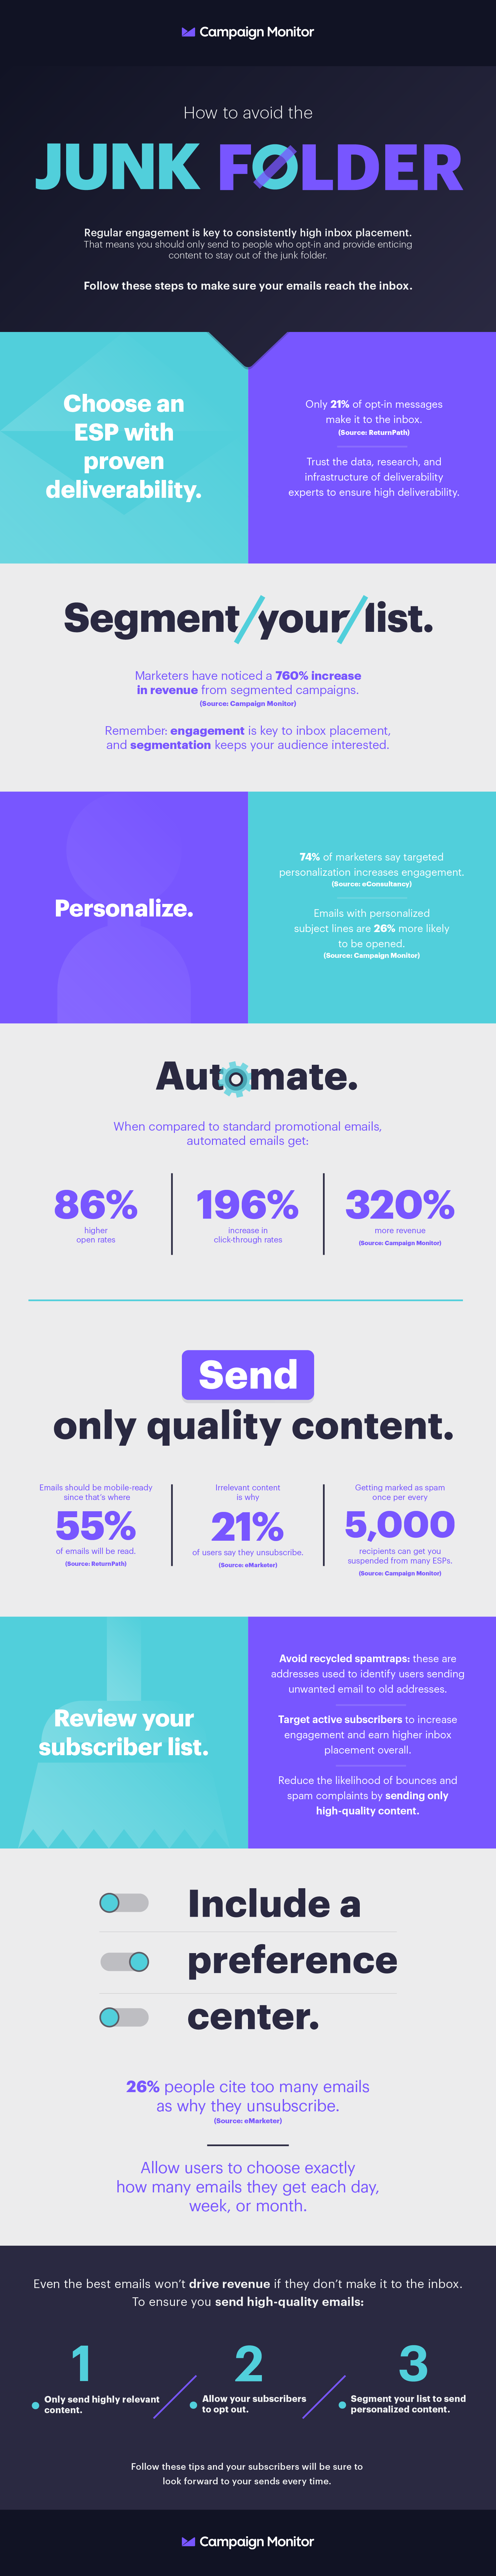 This Campaign Monitor infographic will tell you everything you need to know about how to avoid the junk folder when sending emails.